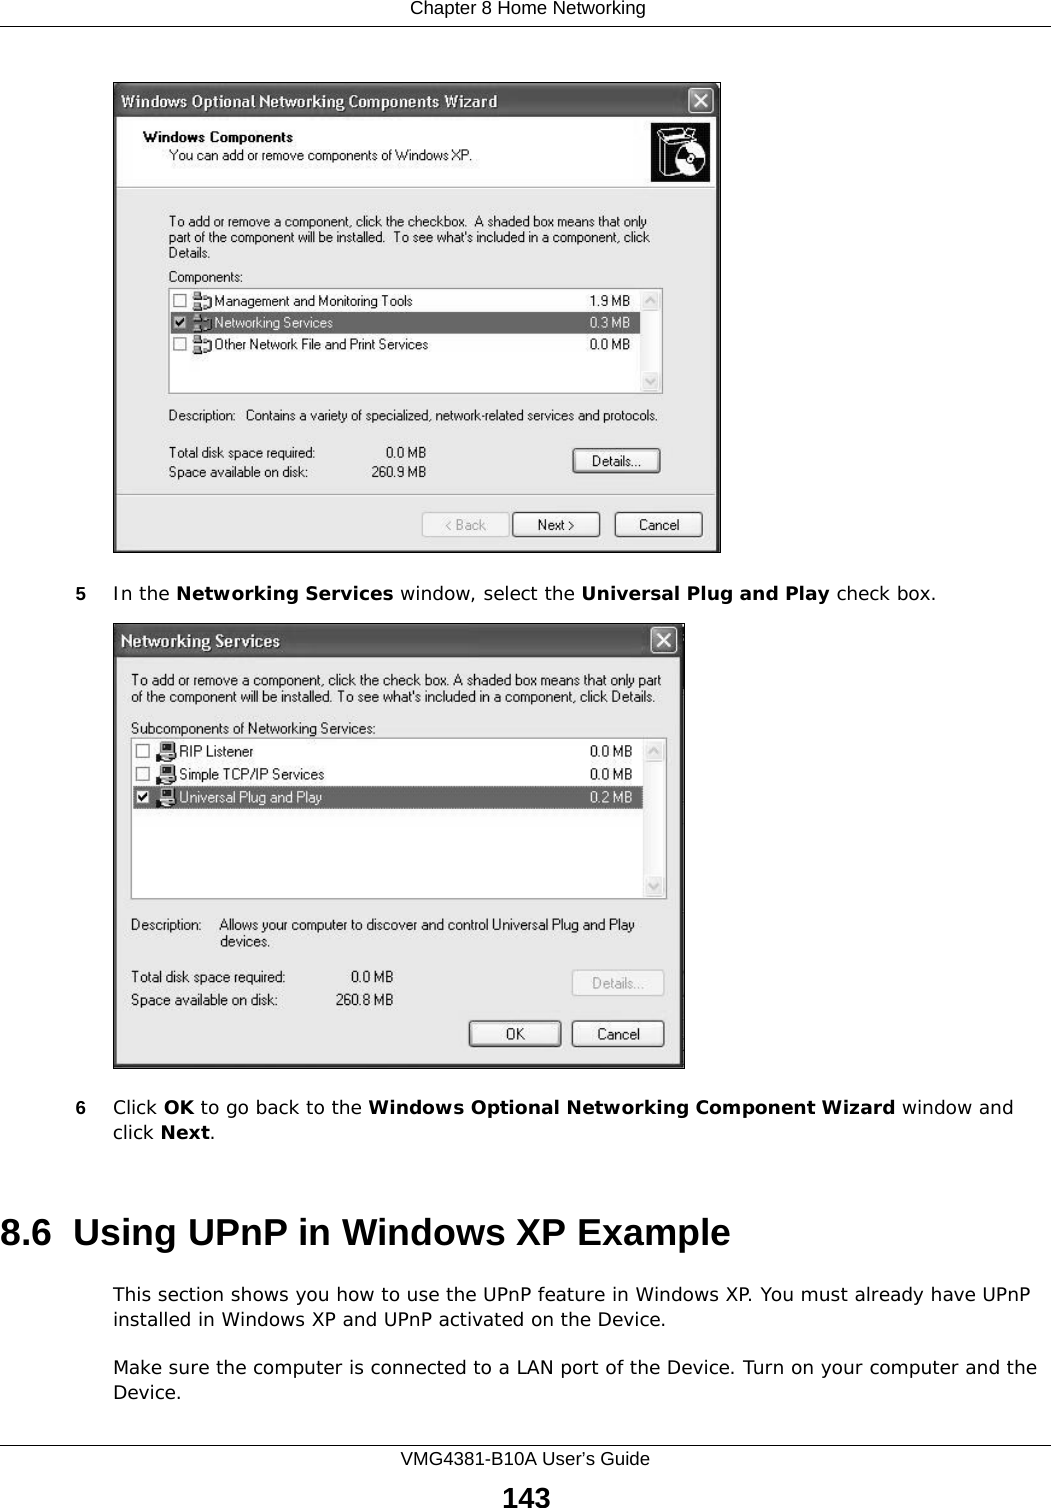  Chapter 8 Home NetworkingVMG4381-B10A User’s Guide143Windows Optional Networking Components Wizard5In the Networking Services window, select the Universal Plug and Play check box. Networking Services6Click OK to go back to the Windows Optional Networking Component Wizard window and click Next. 8.6  Using UPnP in Windows XP ExampleThis section shows you how to use the UPnP feature in Windows XP. You must already have UPnP installed in Windows XP and UPnP activated on the Device.Make sure the computer is connected to a LAN port of the Device. Turn on your computer and the Device. 